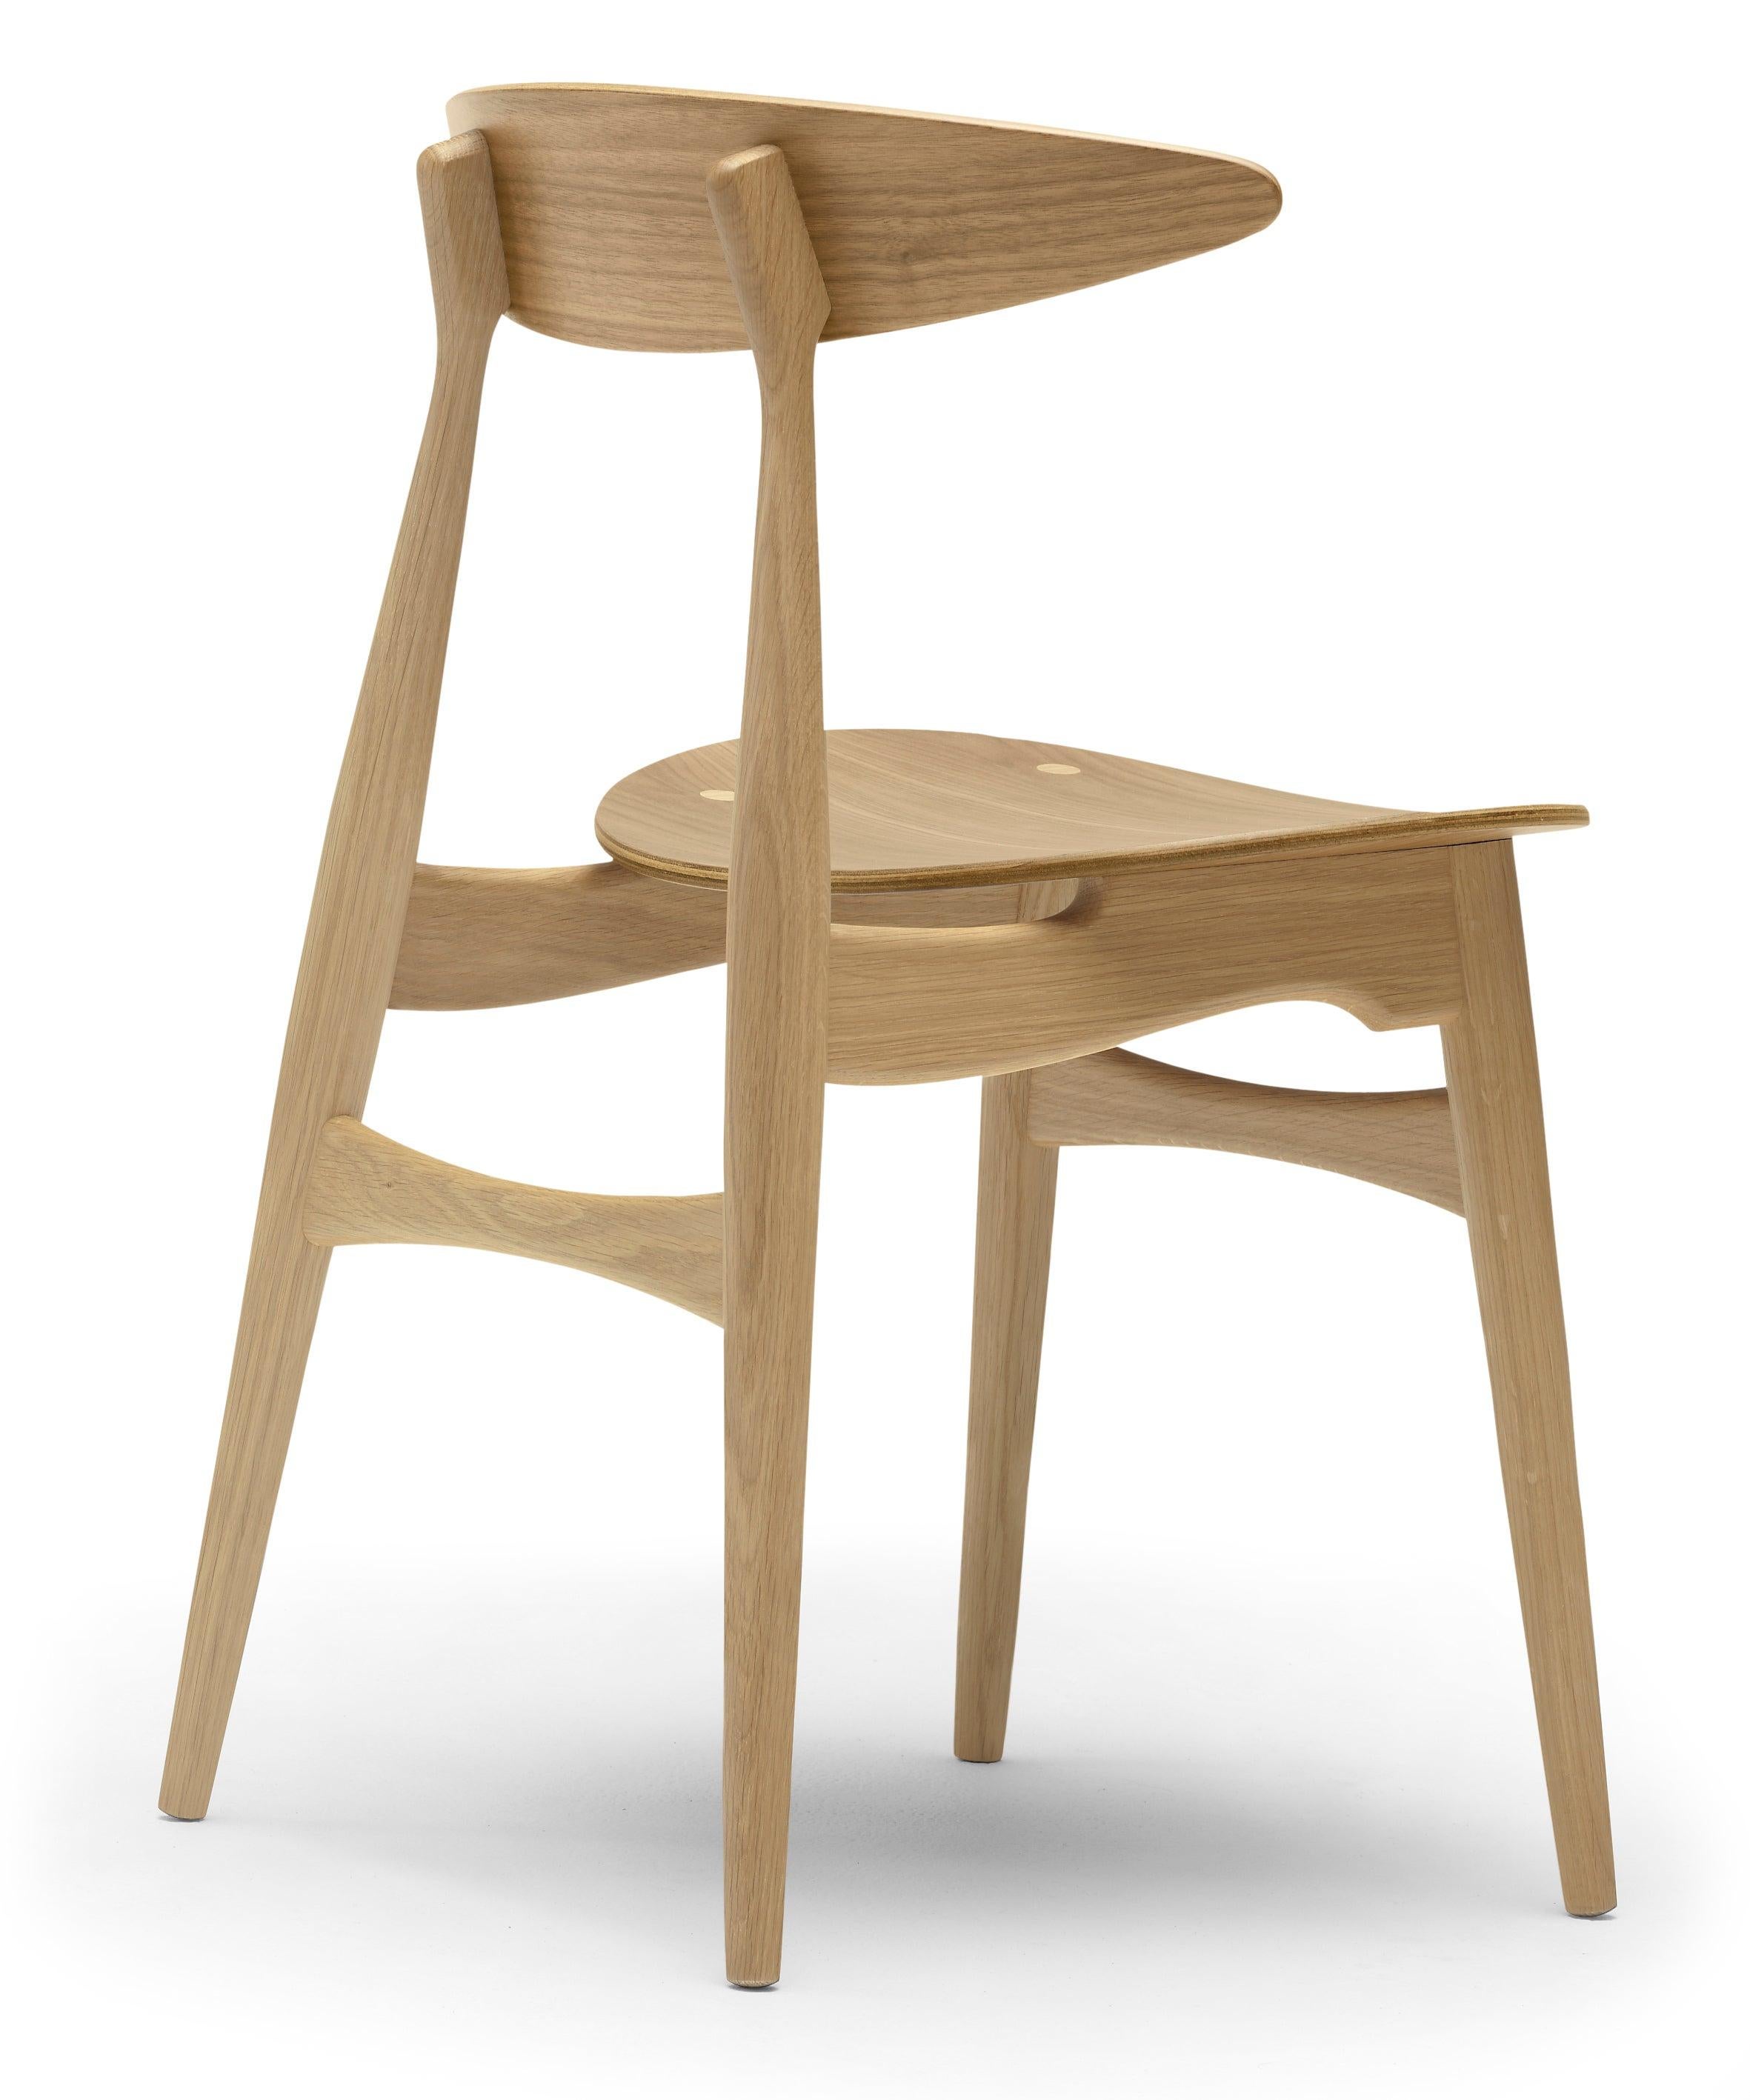 Designed for Carl Hansen & SÃ¸n in 1957, Hans J. Wegnerâ€™s CH33T chair remained in production for ten consecutive years. Carl Hansen & SÃ¸n reintroduced the design in 2012, adding colors from Wegnerâ€™s own working palette to the original variant.